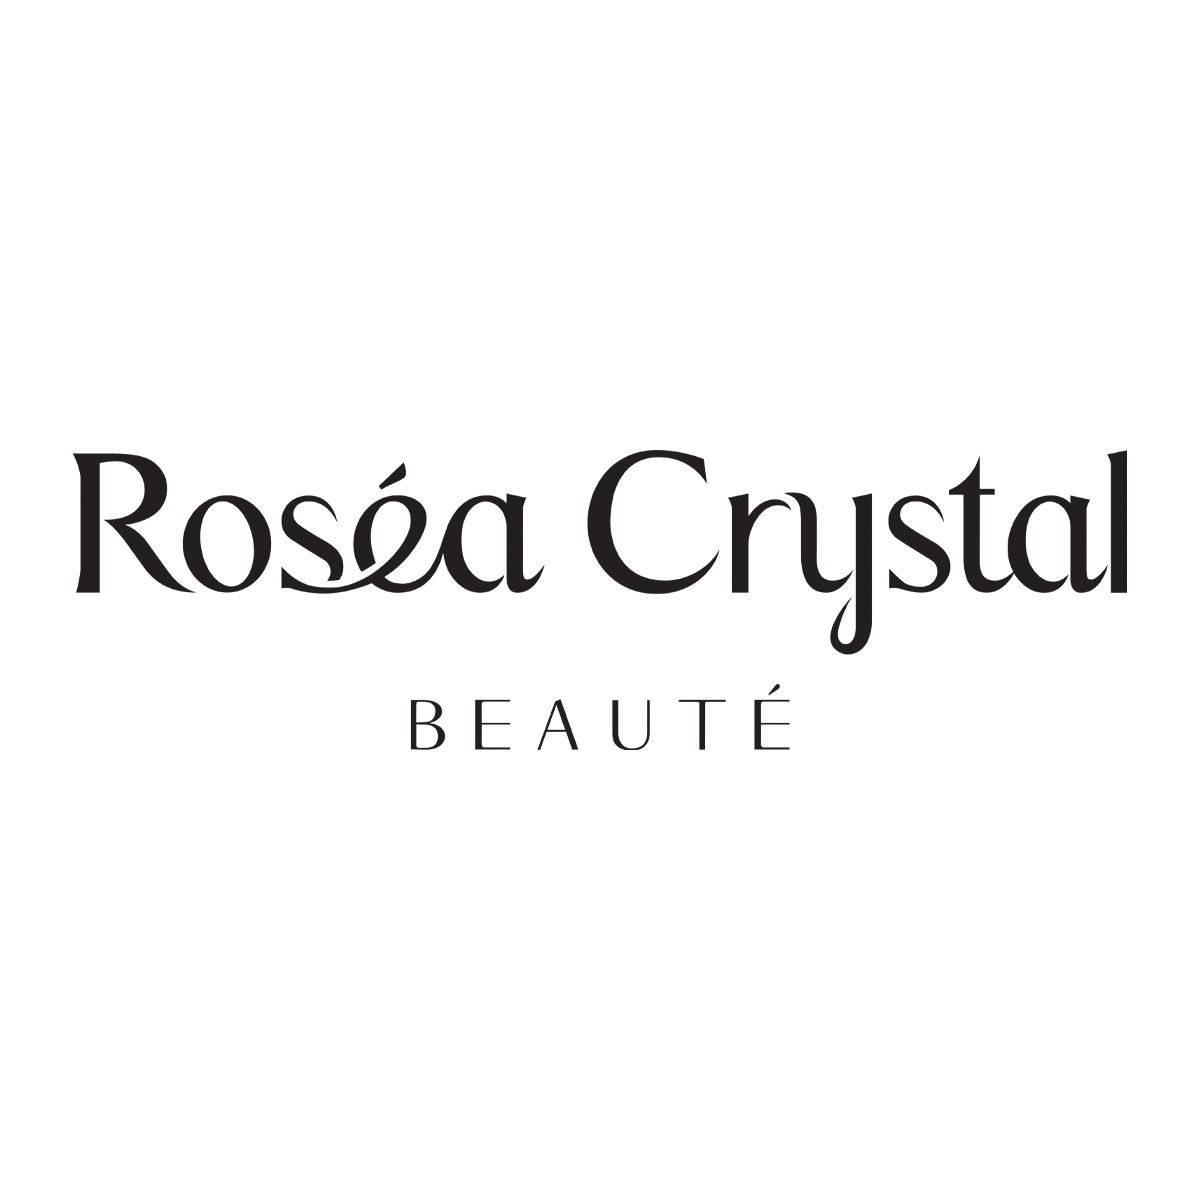 Rosea Crystal Official